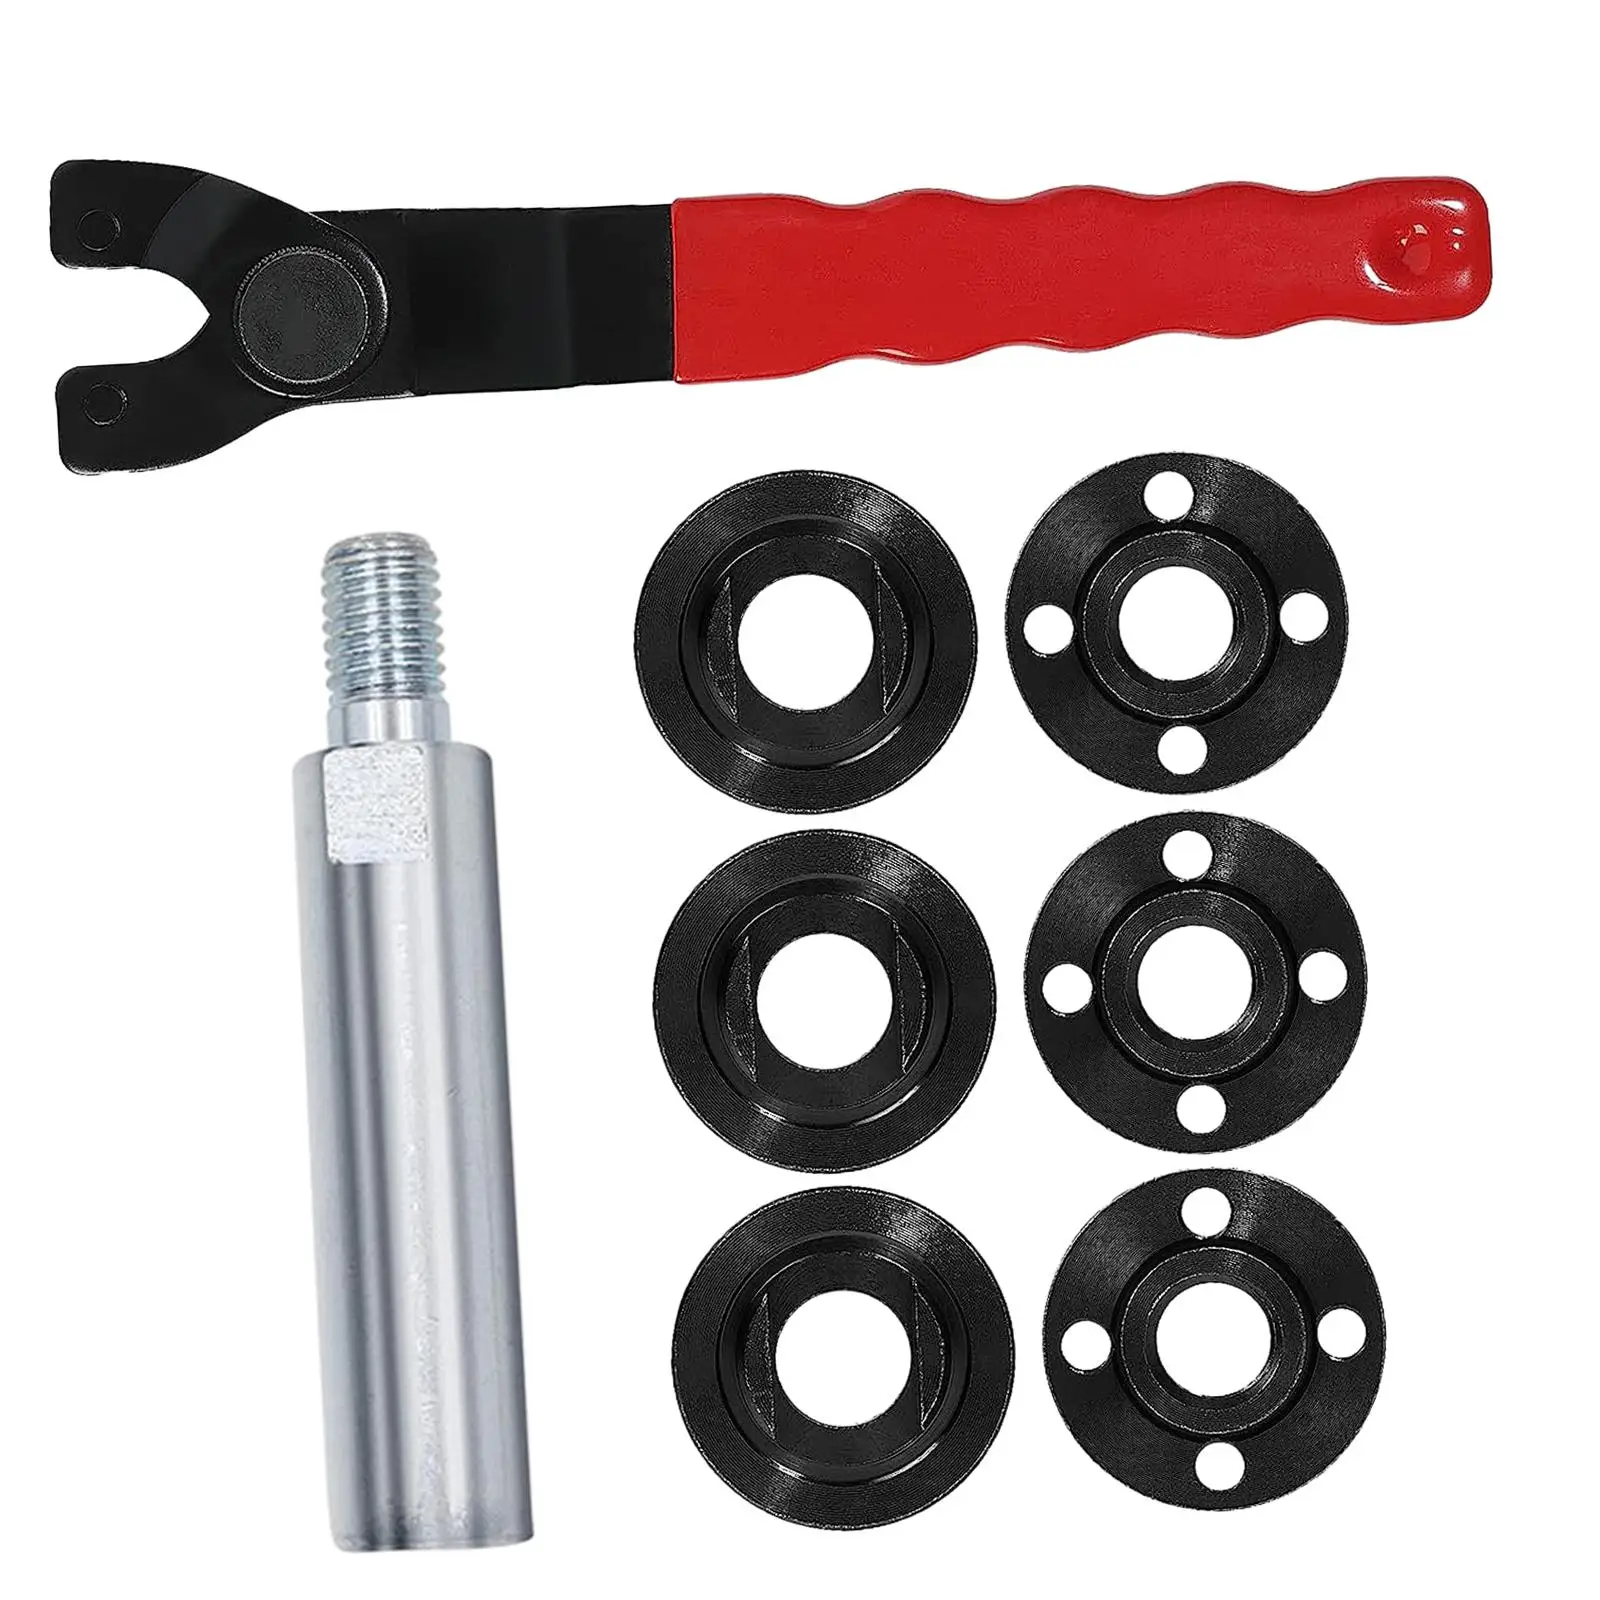 Pin Wrench Nuts Flange Grinder Wrench Home Wrenches Angle Grinder Wrench